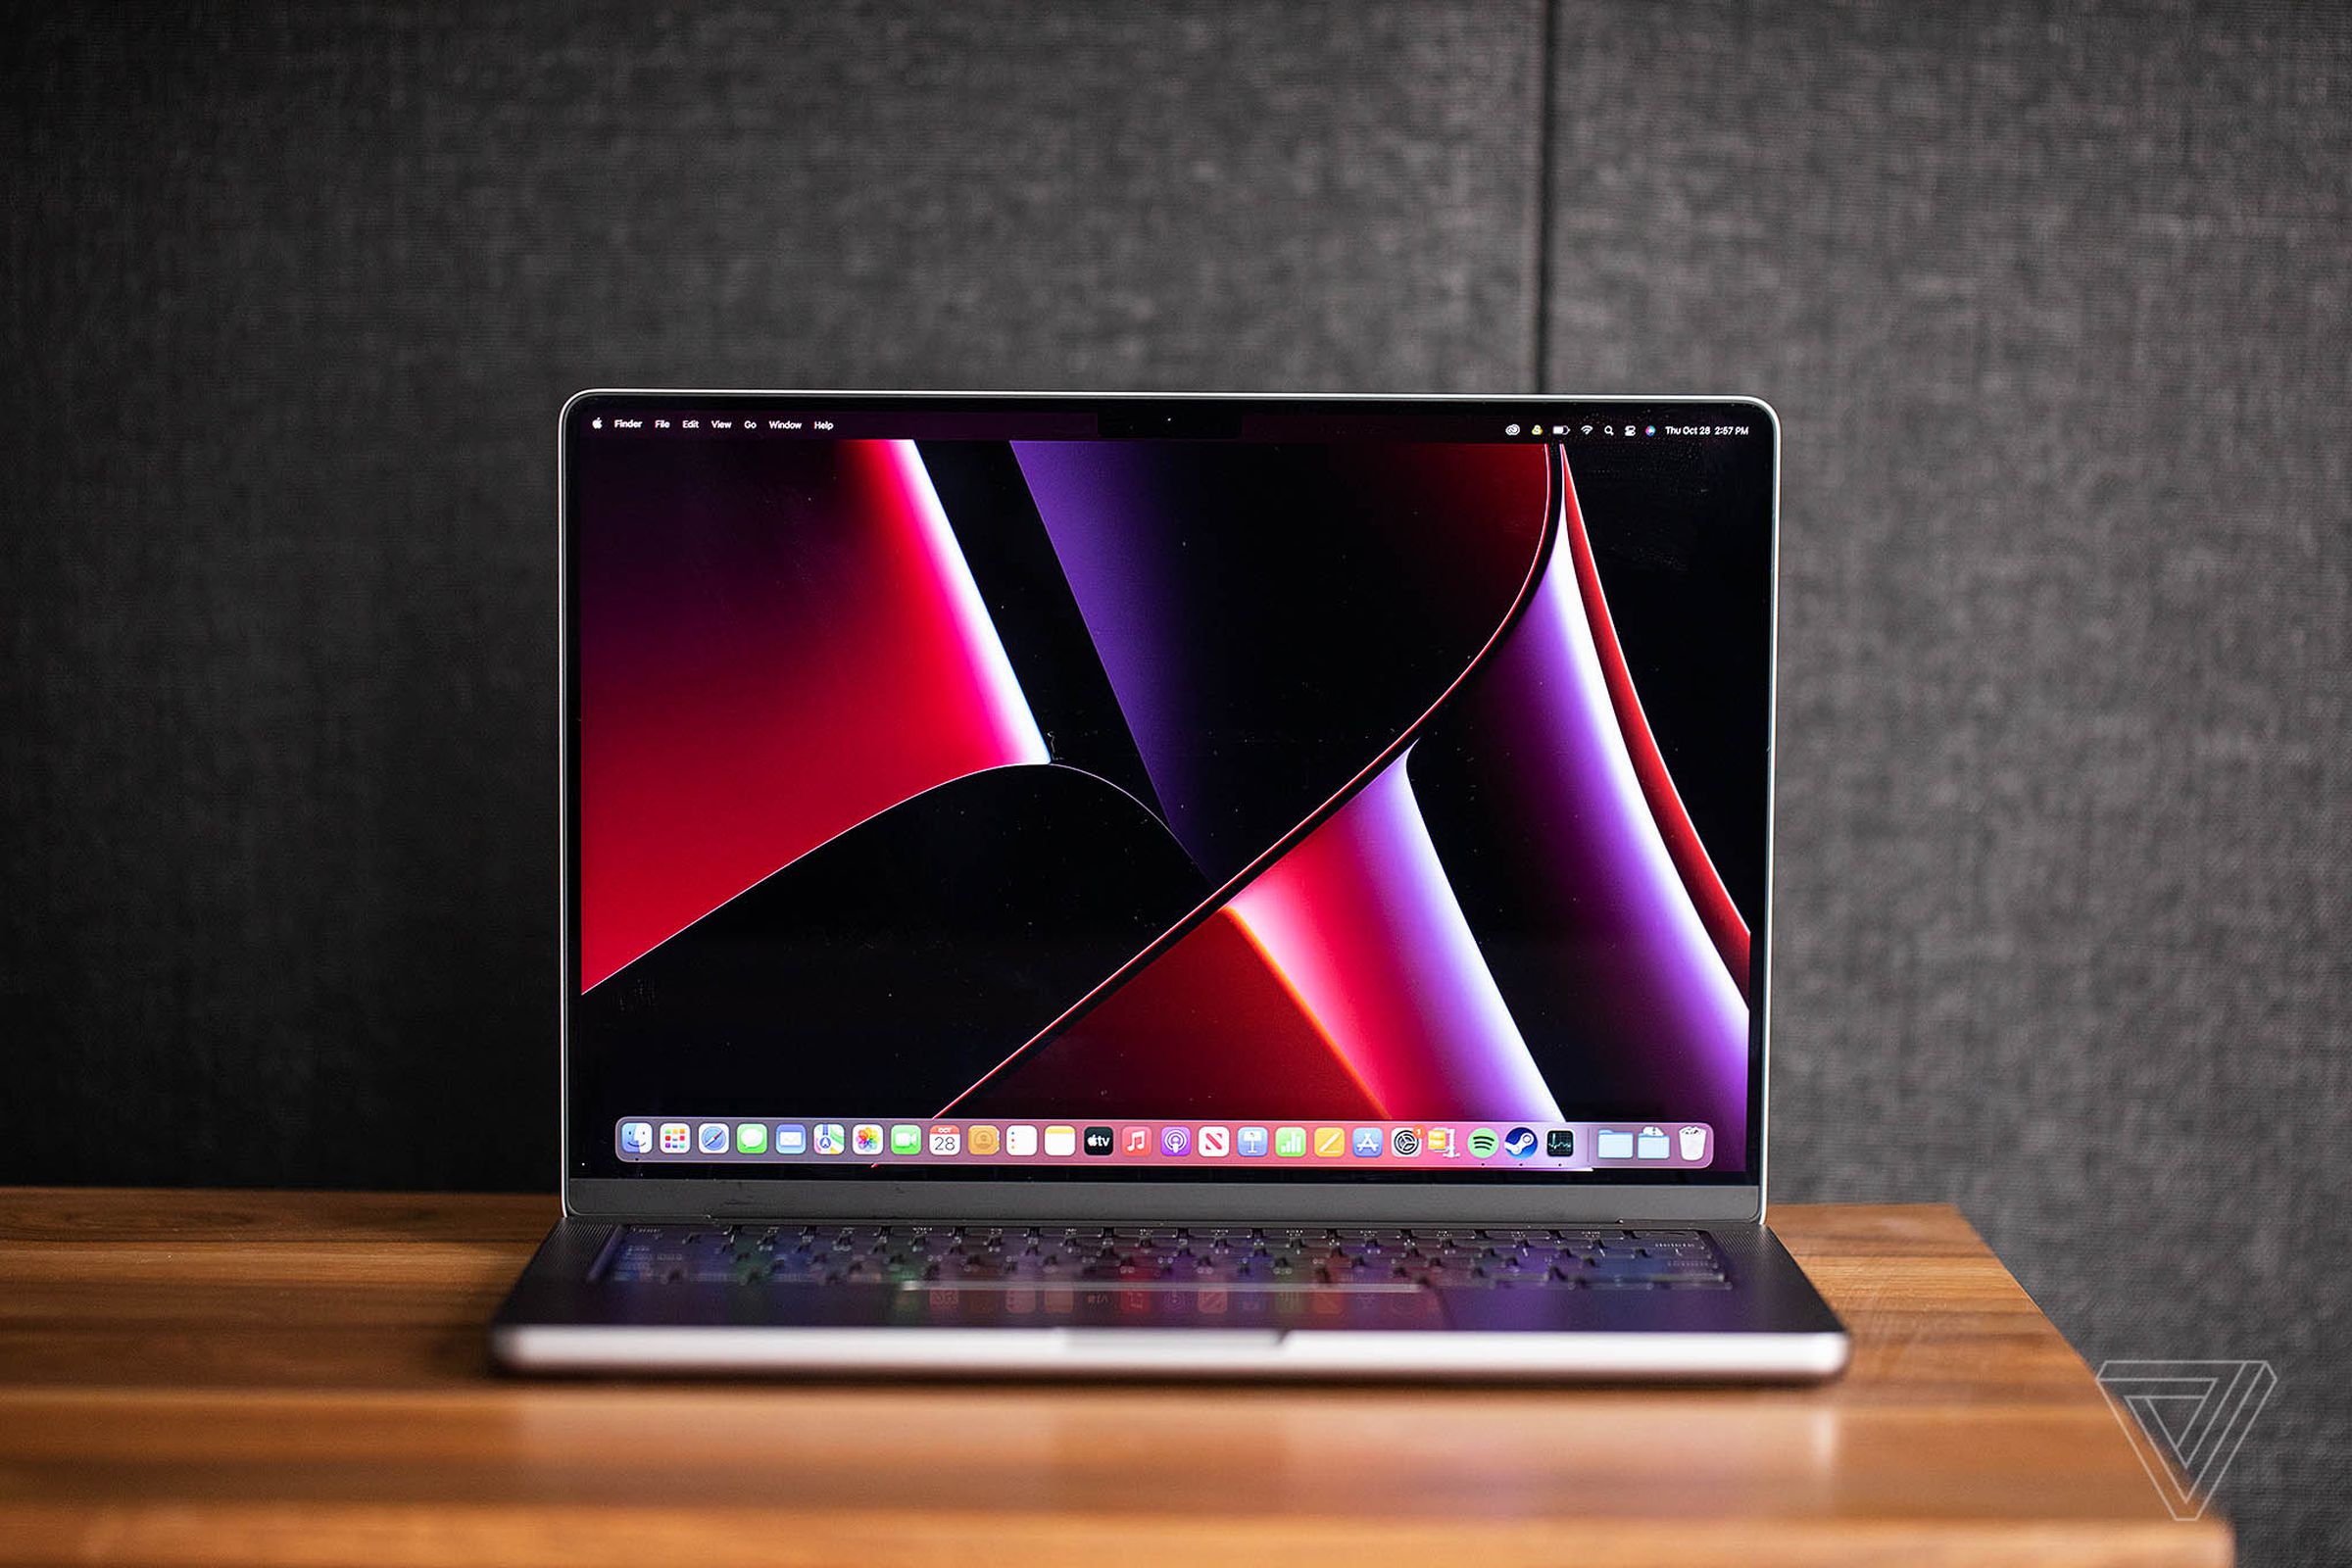 Apple’s 2021 14-inch MacBook Pro sitting turned on and open with its screen facing the camera on a desk.